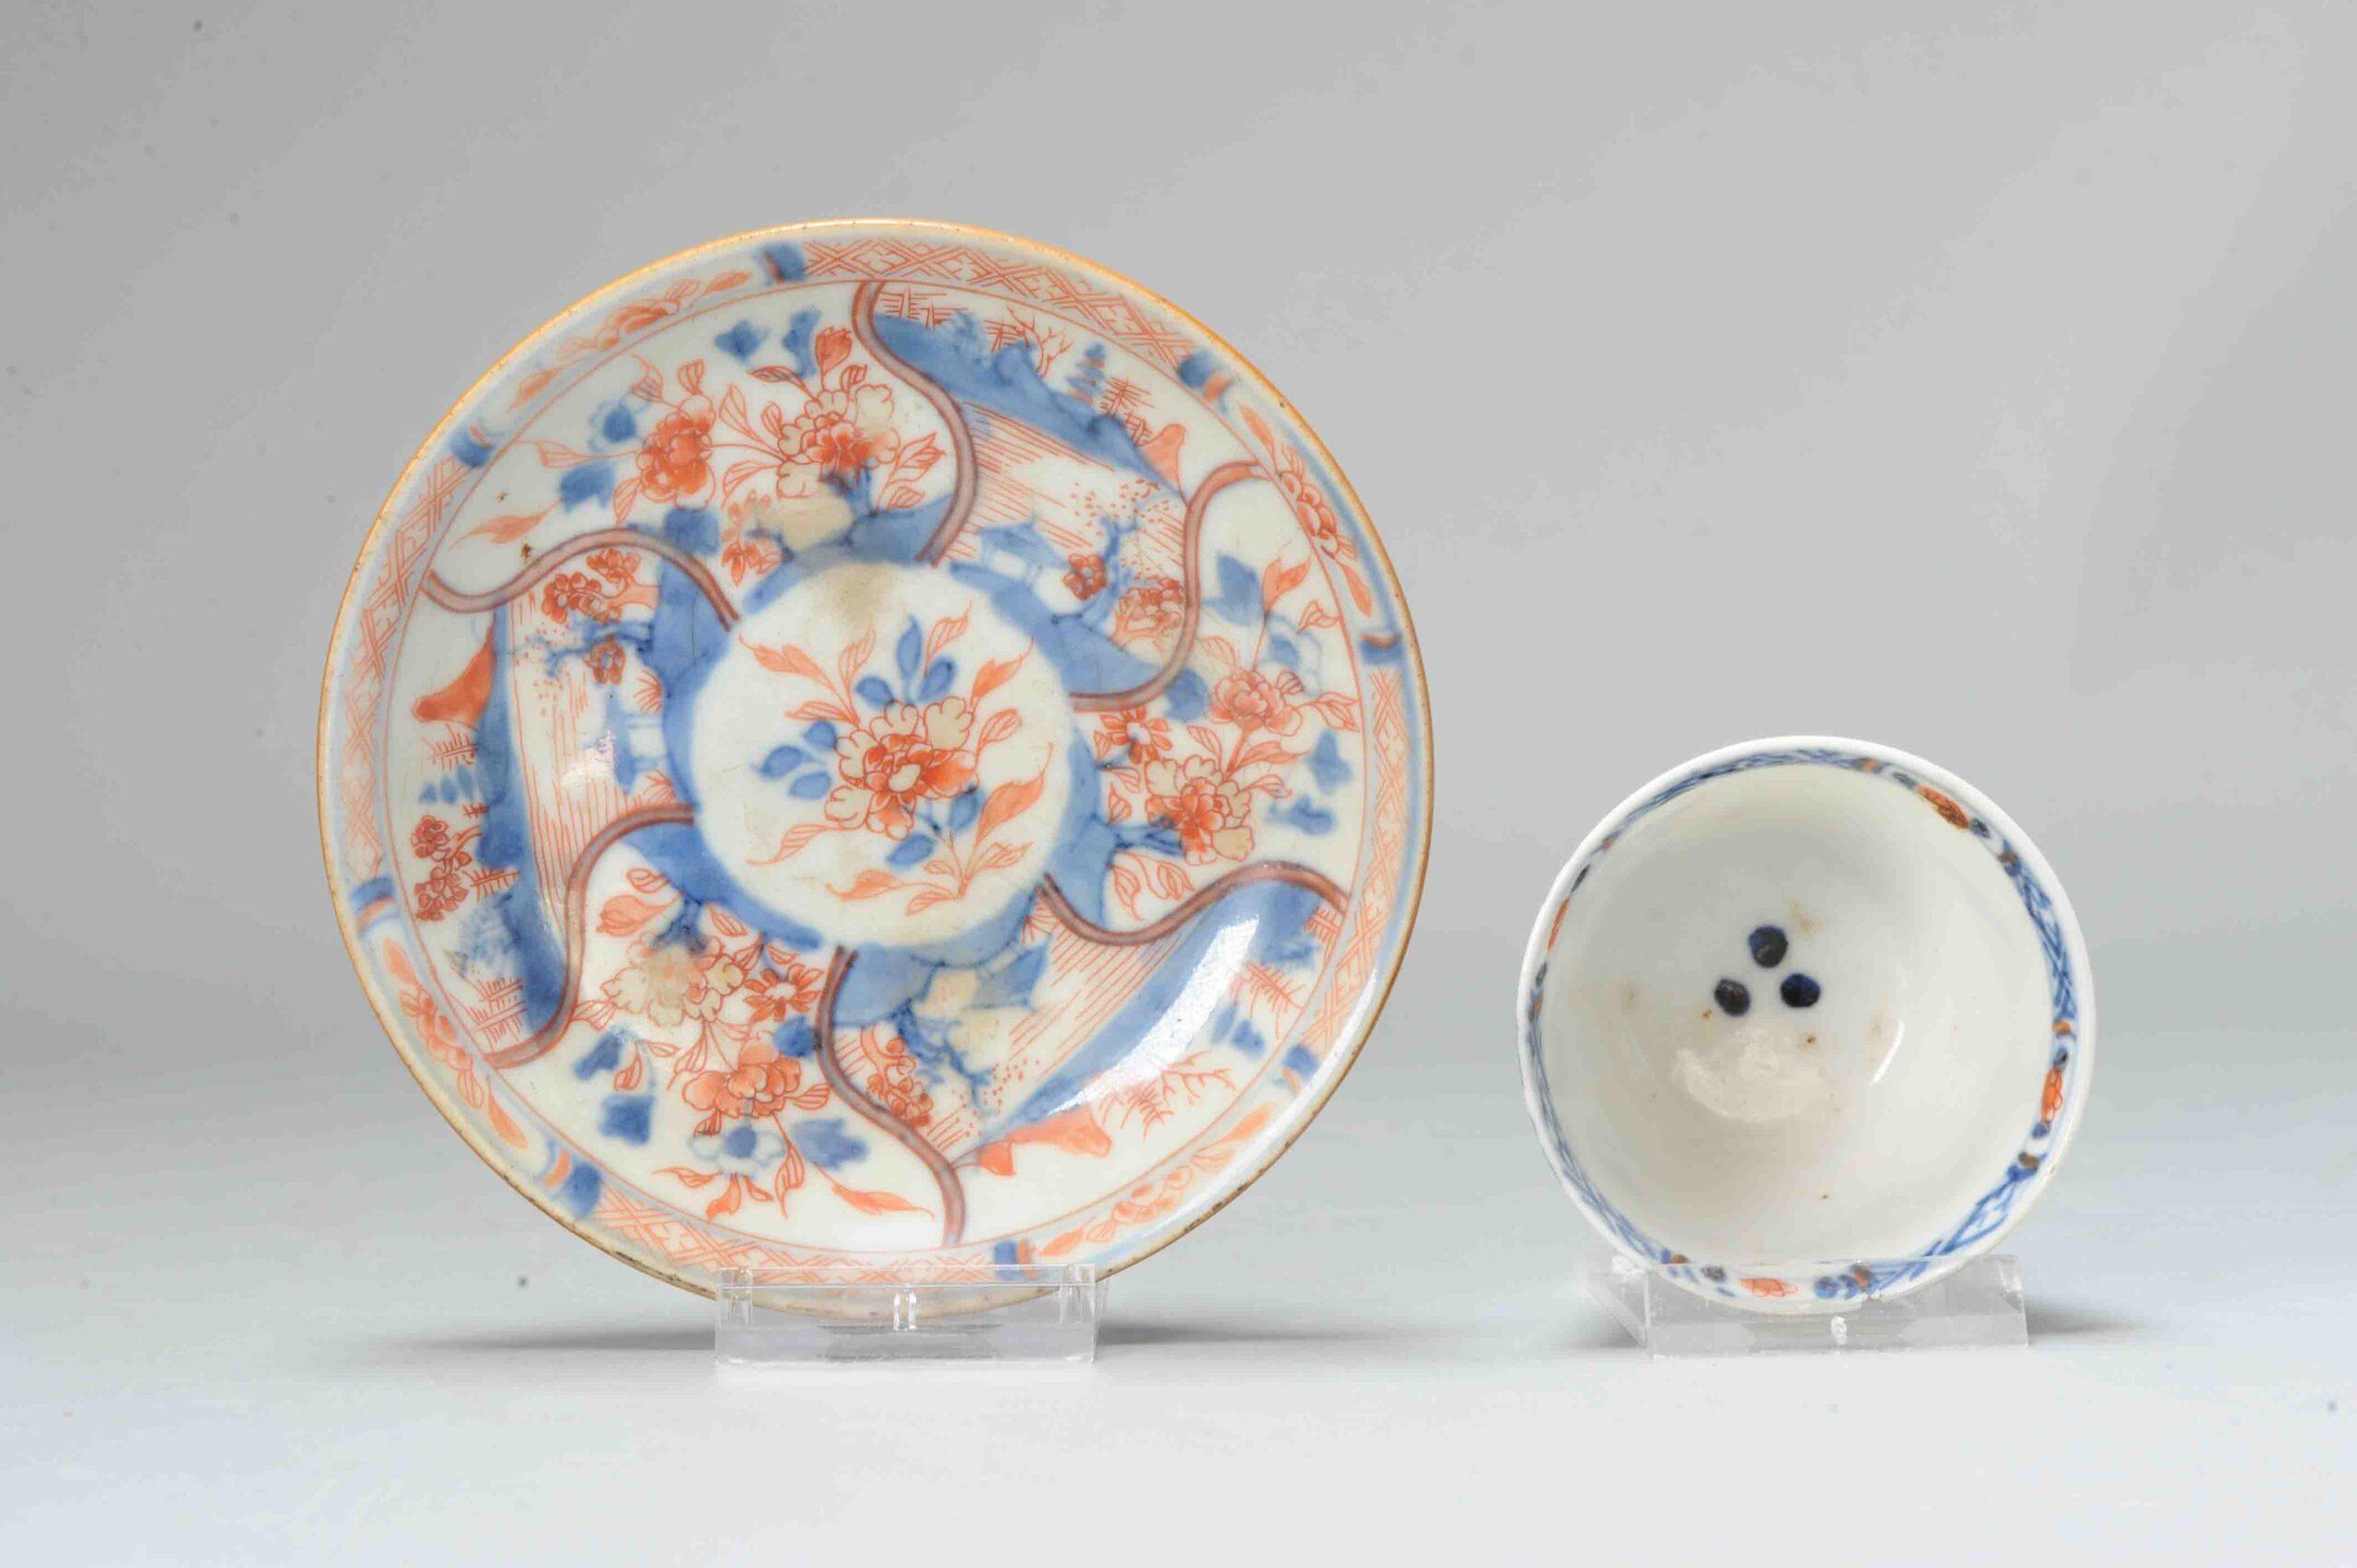 Antique Chinese Porcelain Kangxi Period Tea Bowl Floral Imari Cafe au Lait In Good Condition For Sale In Amsterdam, Noord Holland